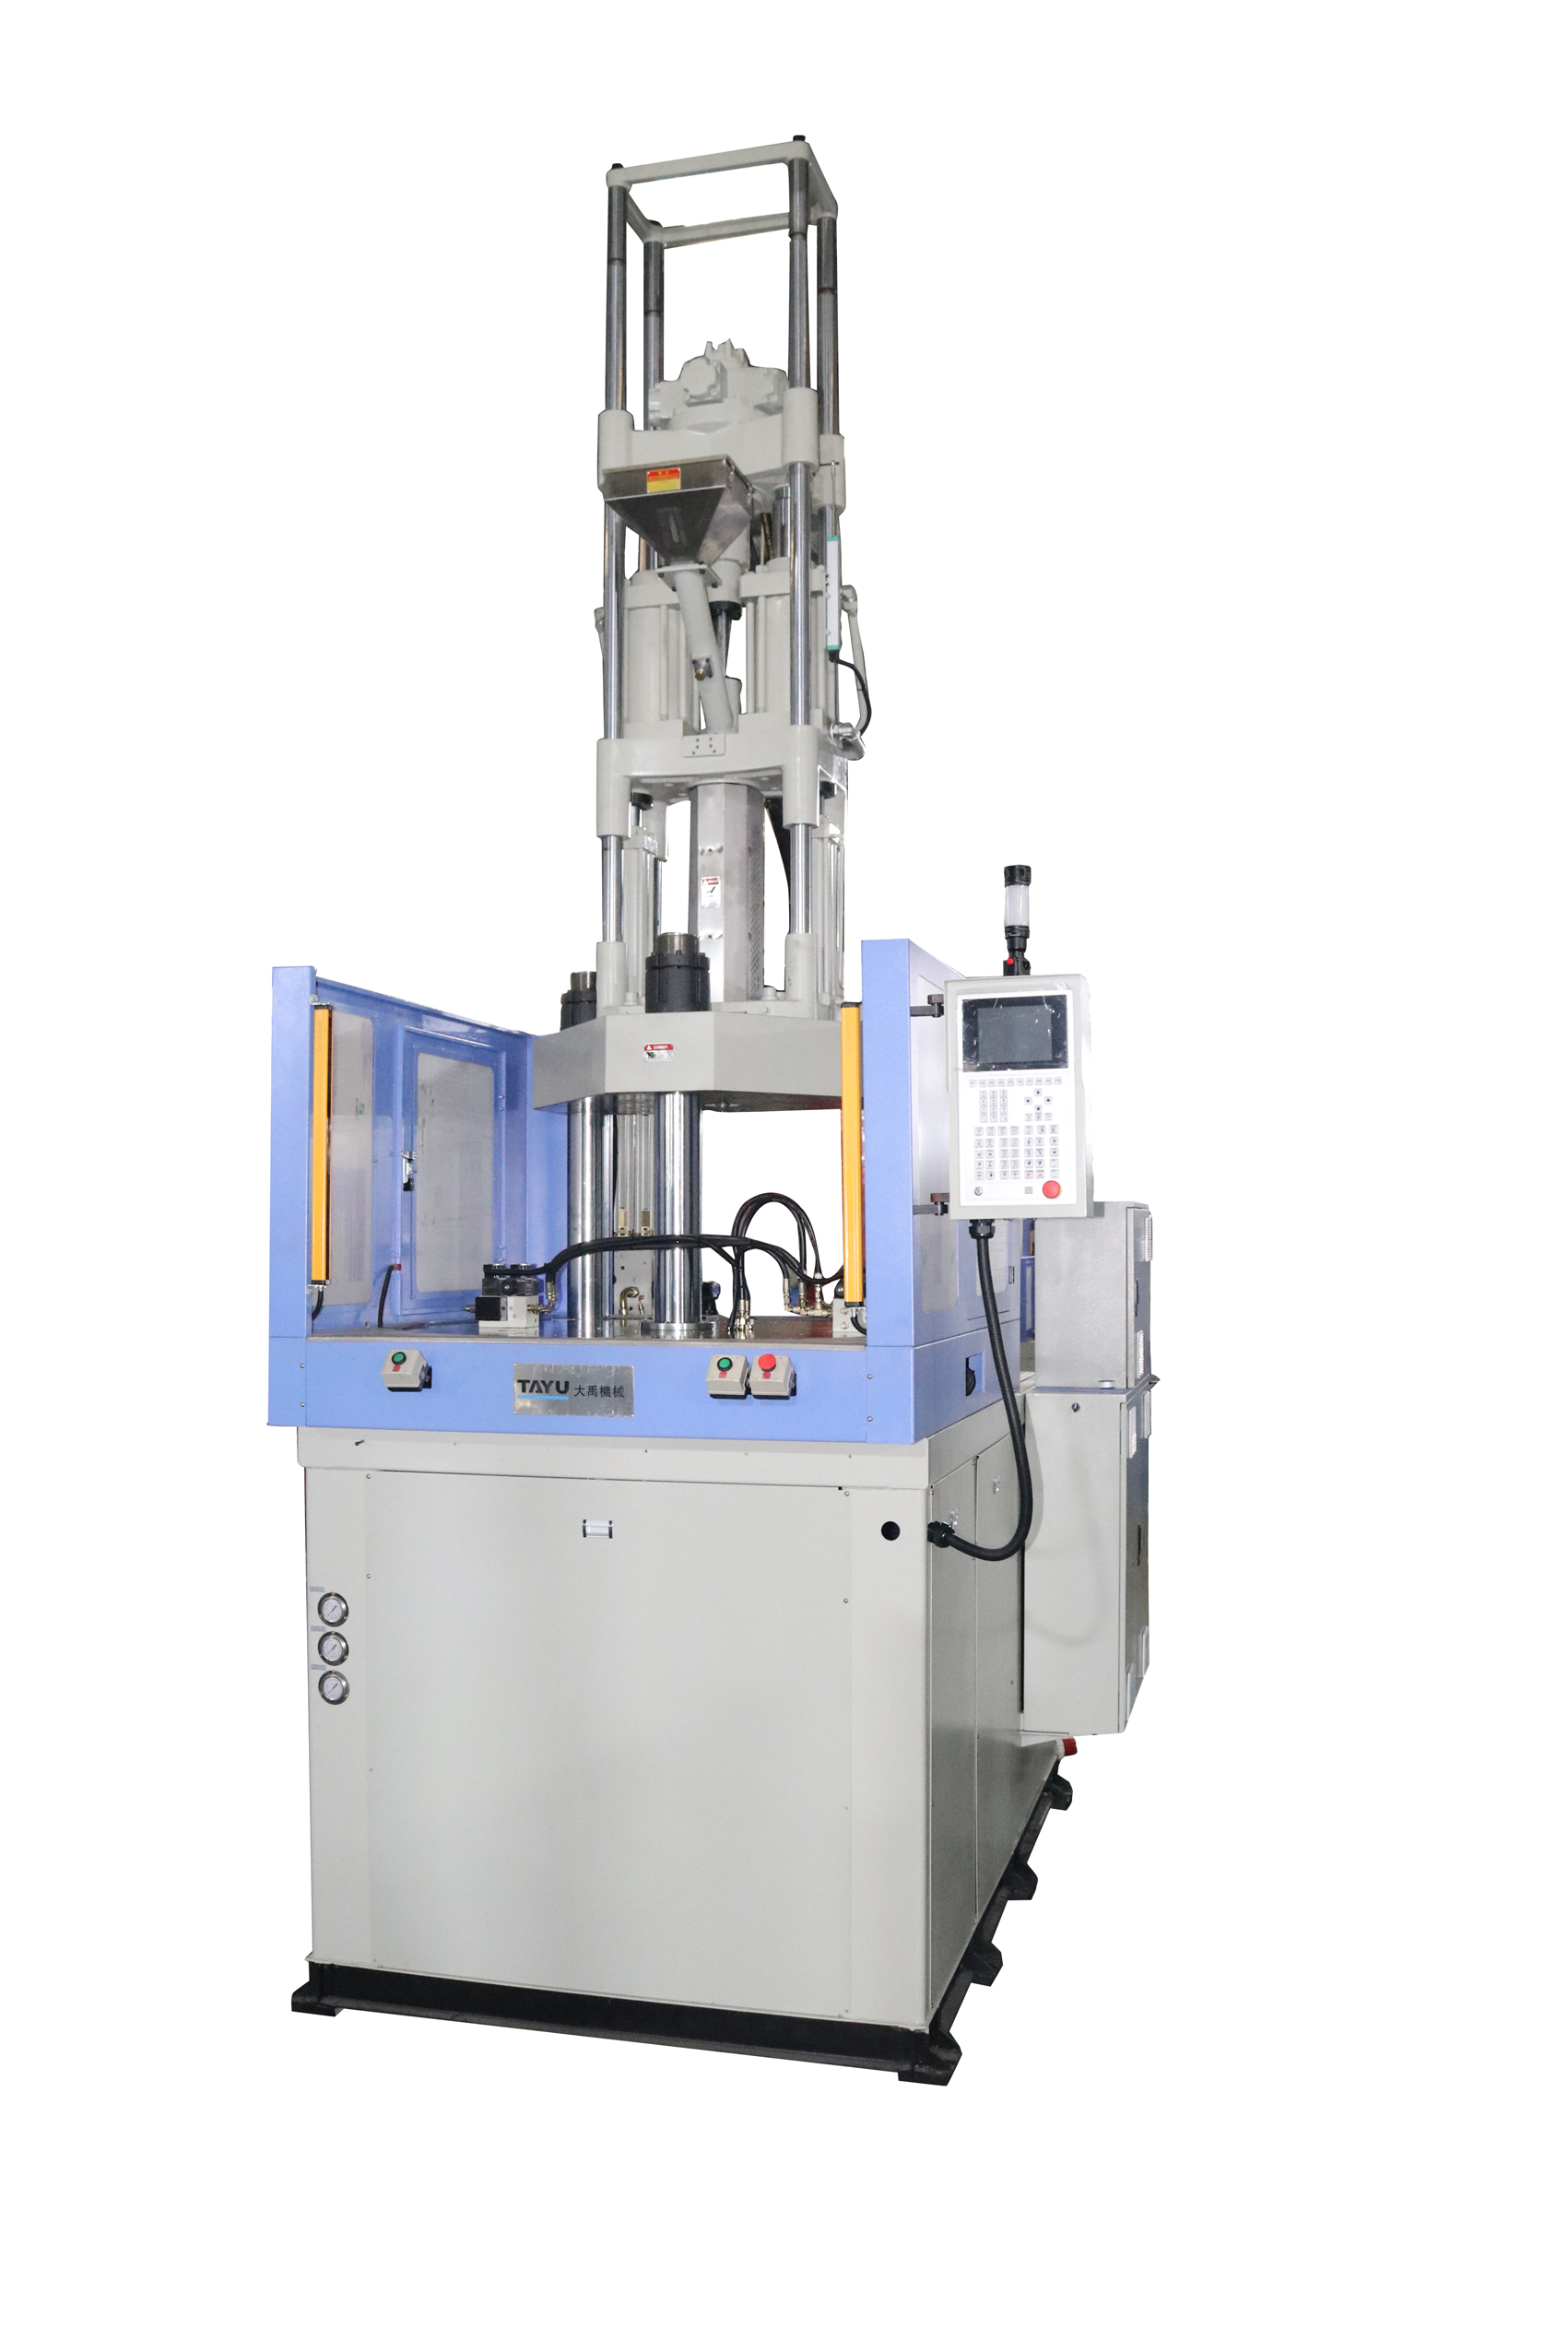 TY-2100.3R vertical injection molding machine